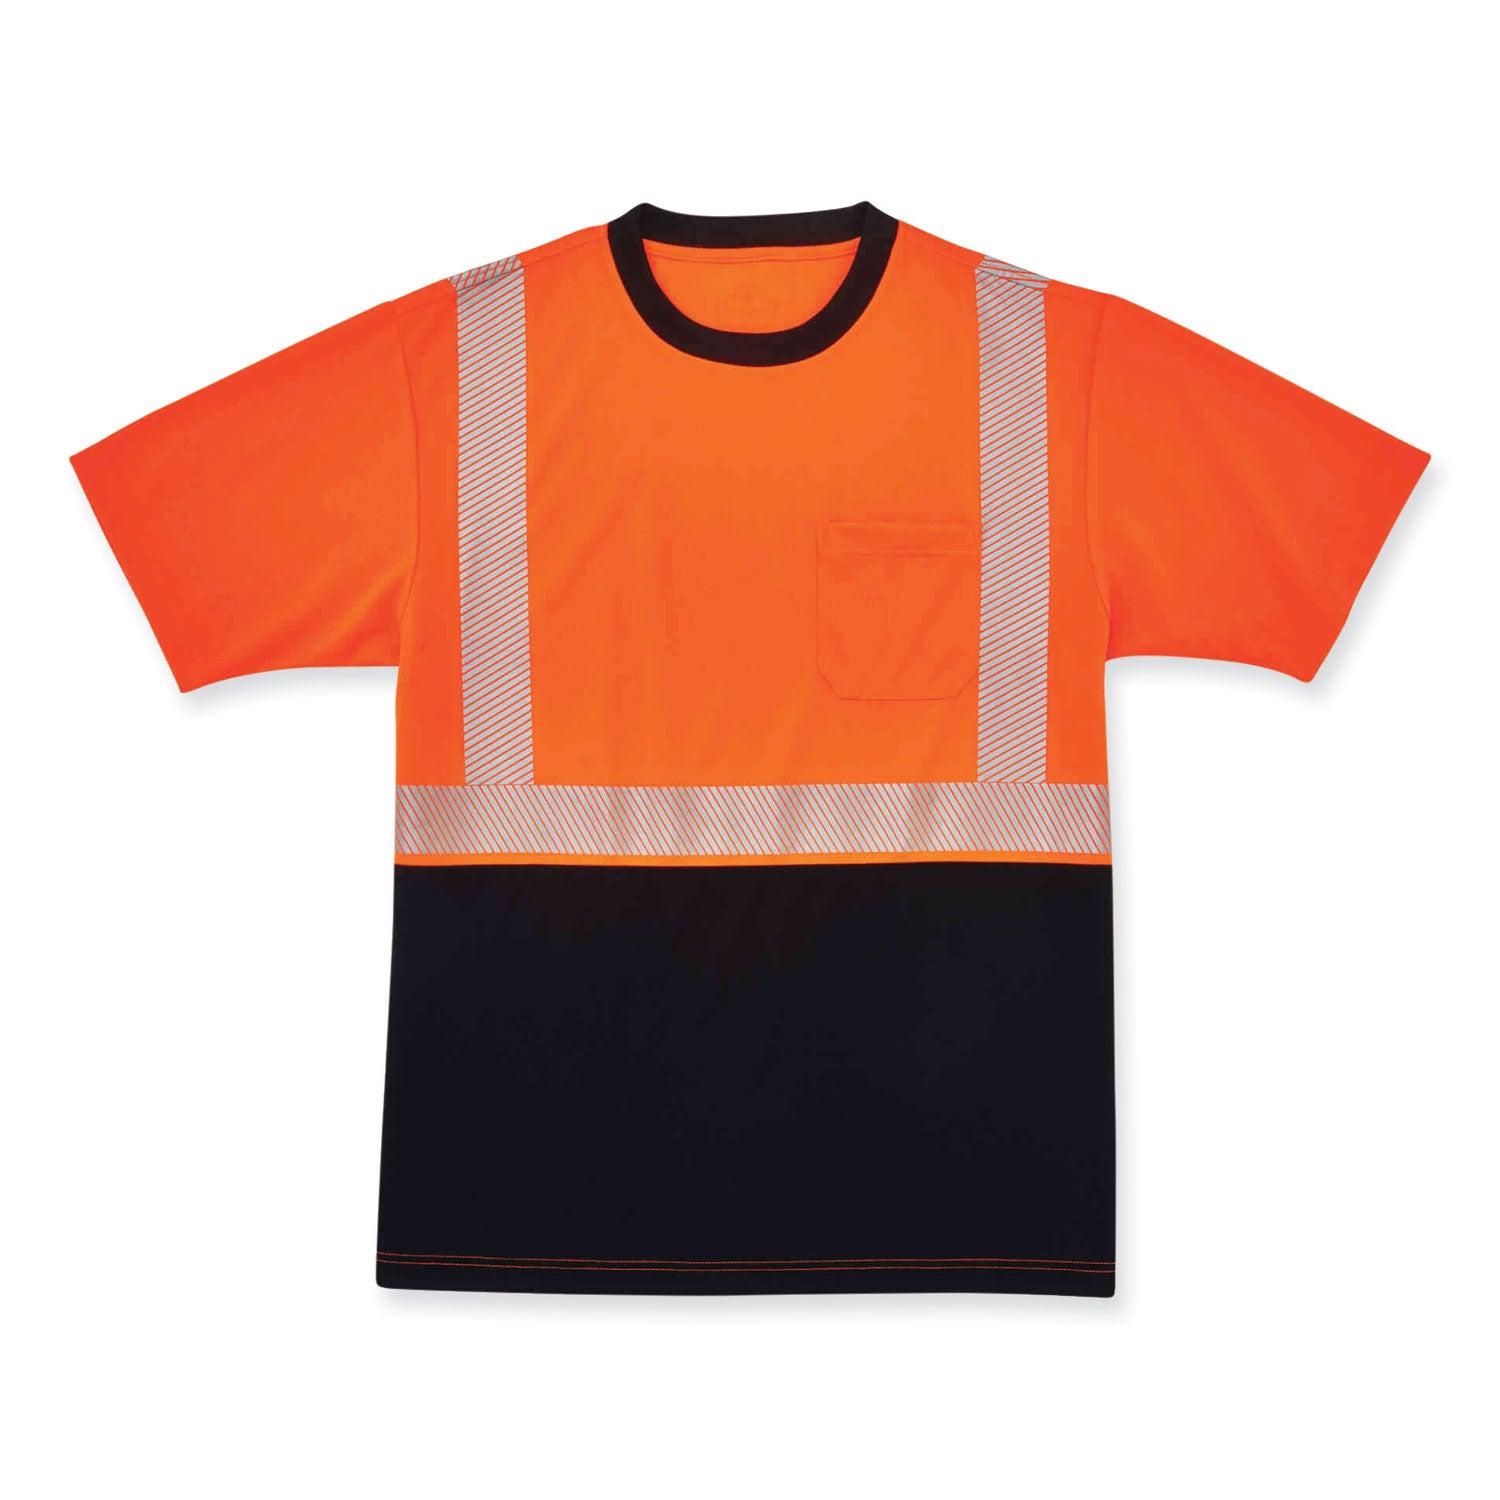 glowear-8280bk-class-2-performance-t-shirt-with-black-bottom-polyester-x-large-orange-ships-in-1-3-business-days_ego22585 - 1